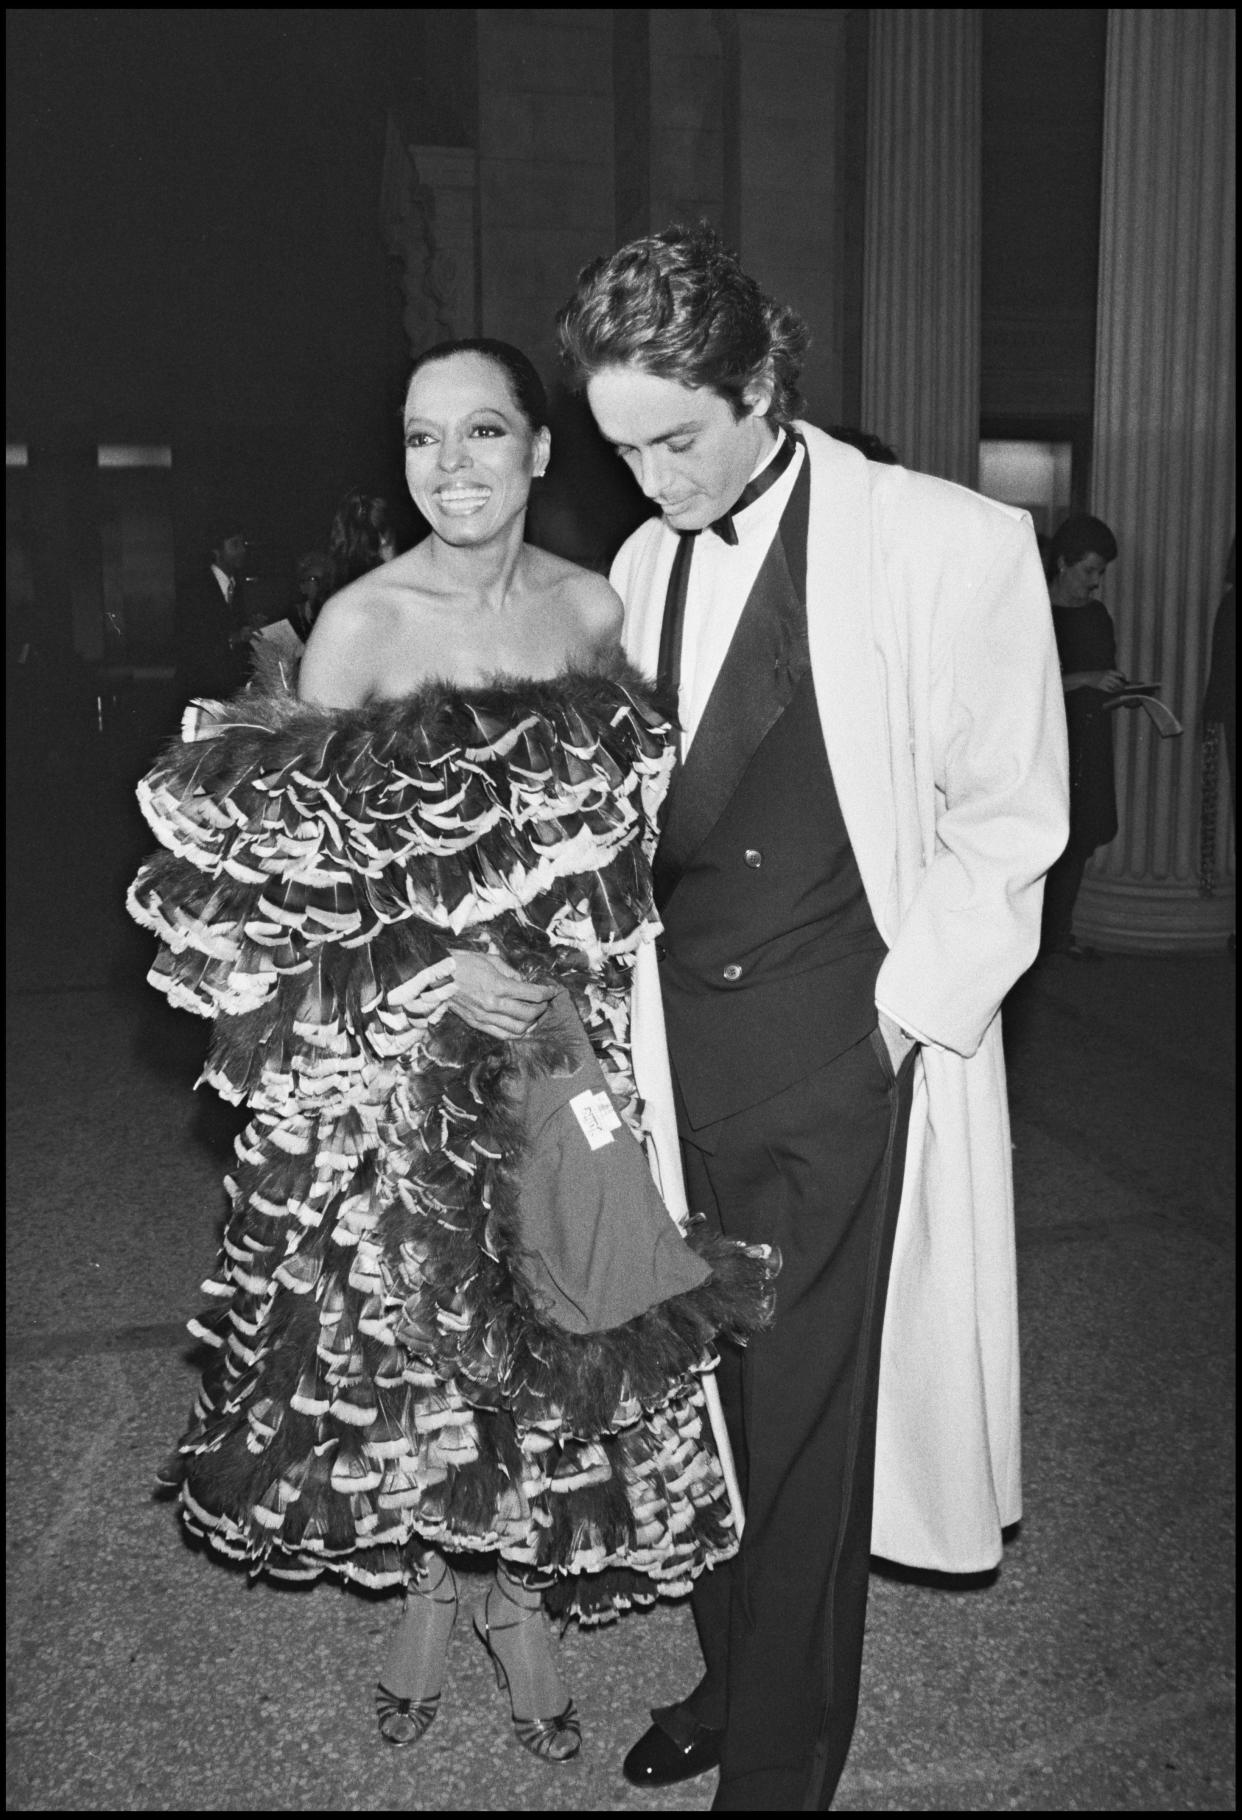 Diana Ross and Patrice Calmette attend a gala evening at the Metropolitan in New York in 1981. / Credit: BERTRAND RINDOFF PETROFF / ANGELI / Getty Images